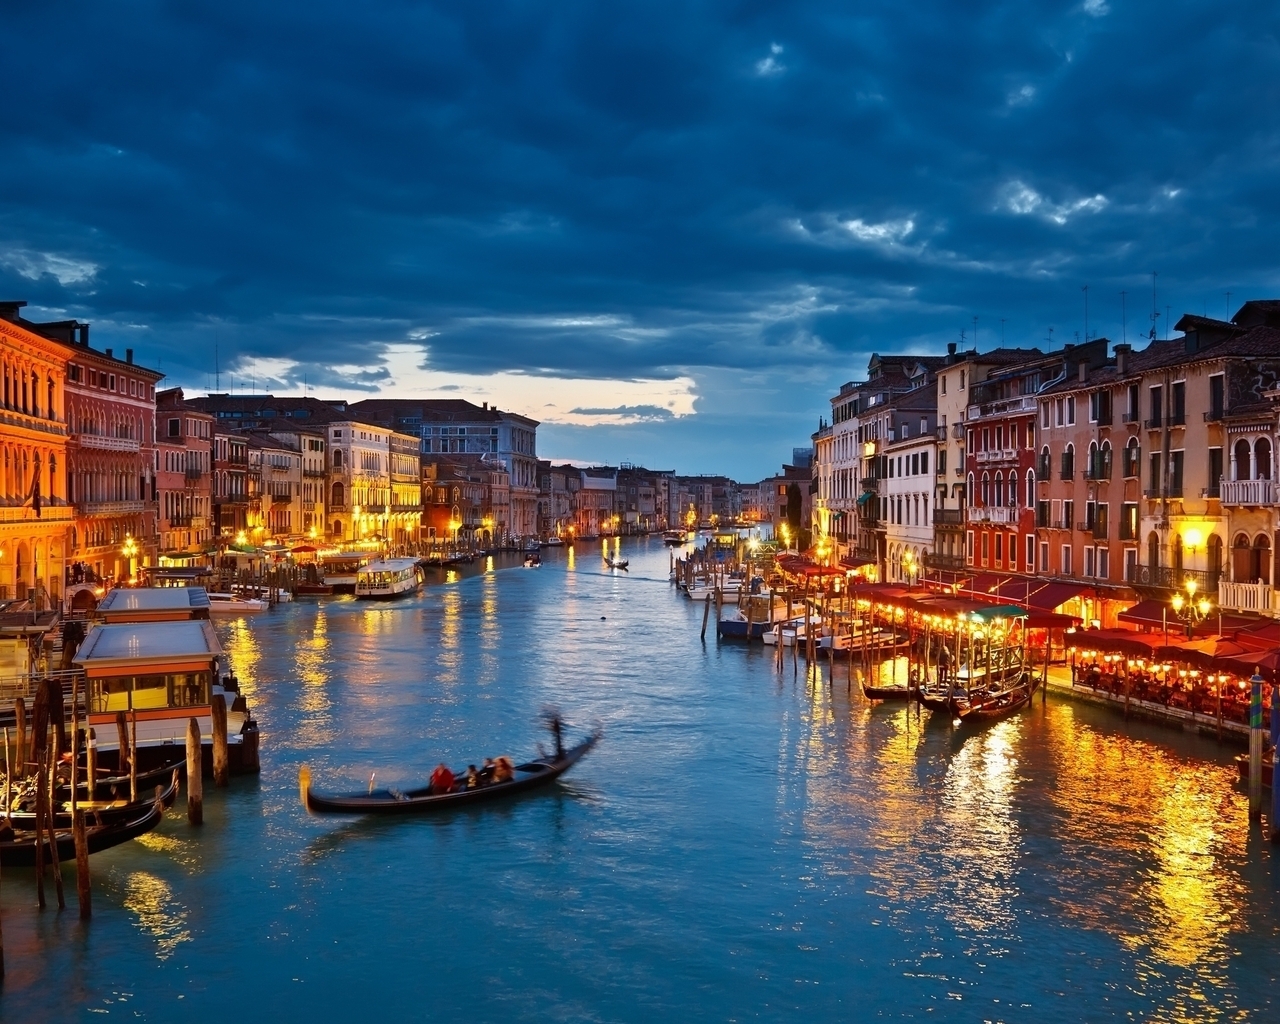 Night in Venice for 1280 x 1024 resolution